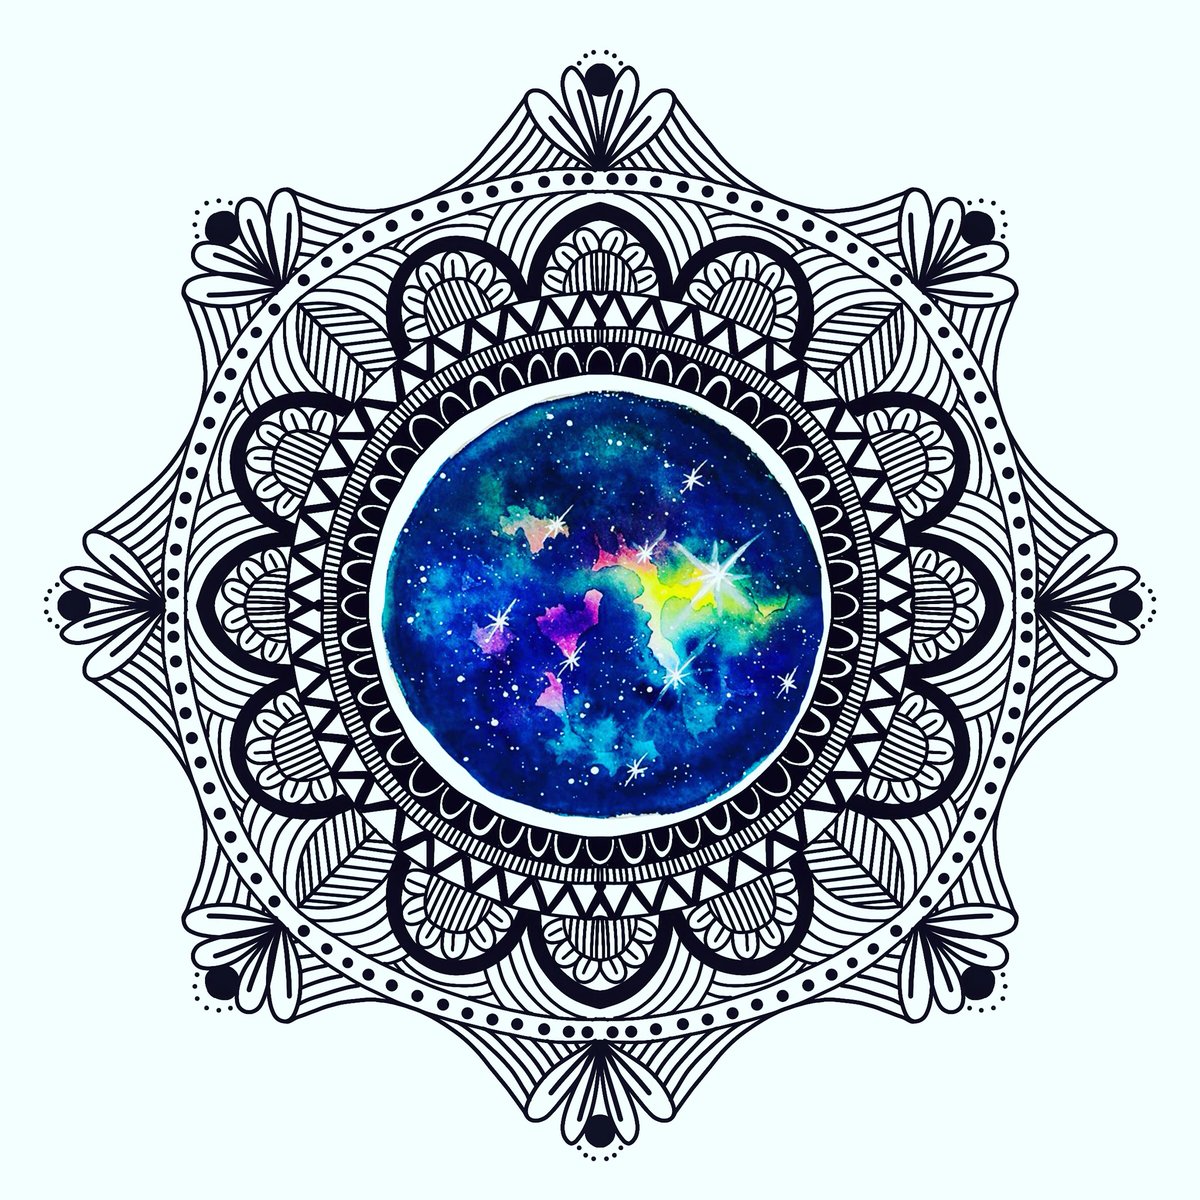 This galaxy mandala will be available at my first art show with RAW! If you’re in San Diego go get tickets! (Link on my profile) It’ll be at @HOBSanDiego @RAW_artists #digital #artwork #art #digitalart #naturalbornartists #raw